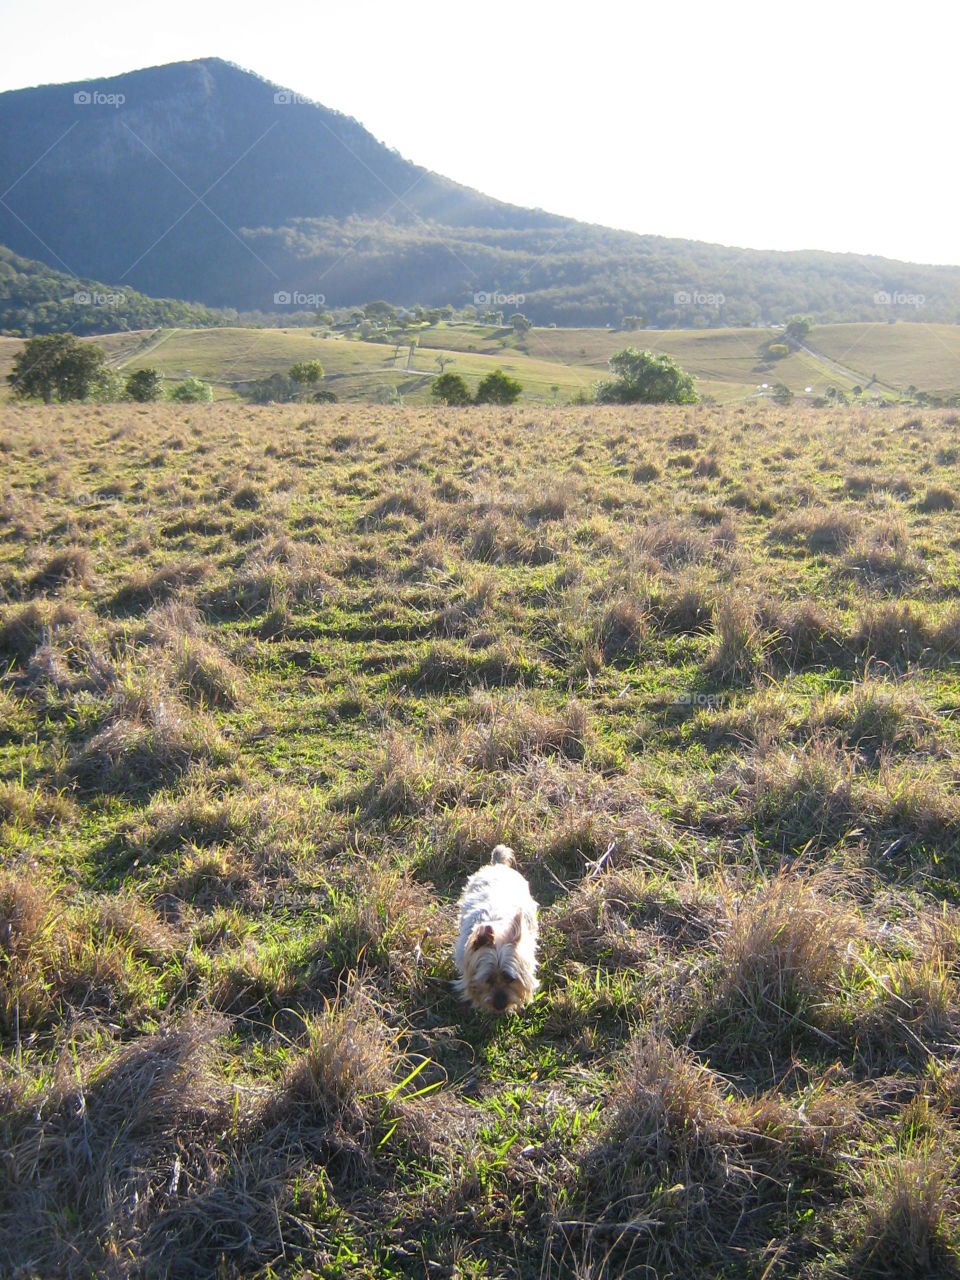 A silky terrior explores the countryside on a hill with mountain views in Queensland, Australia